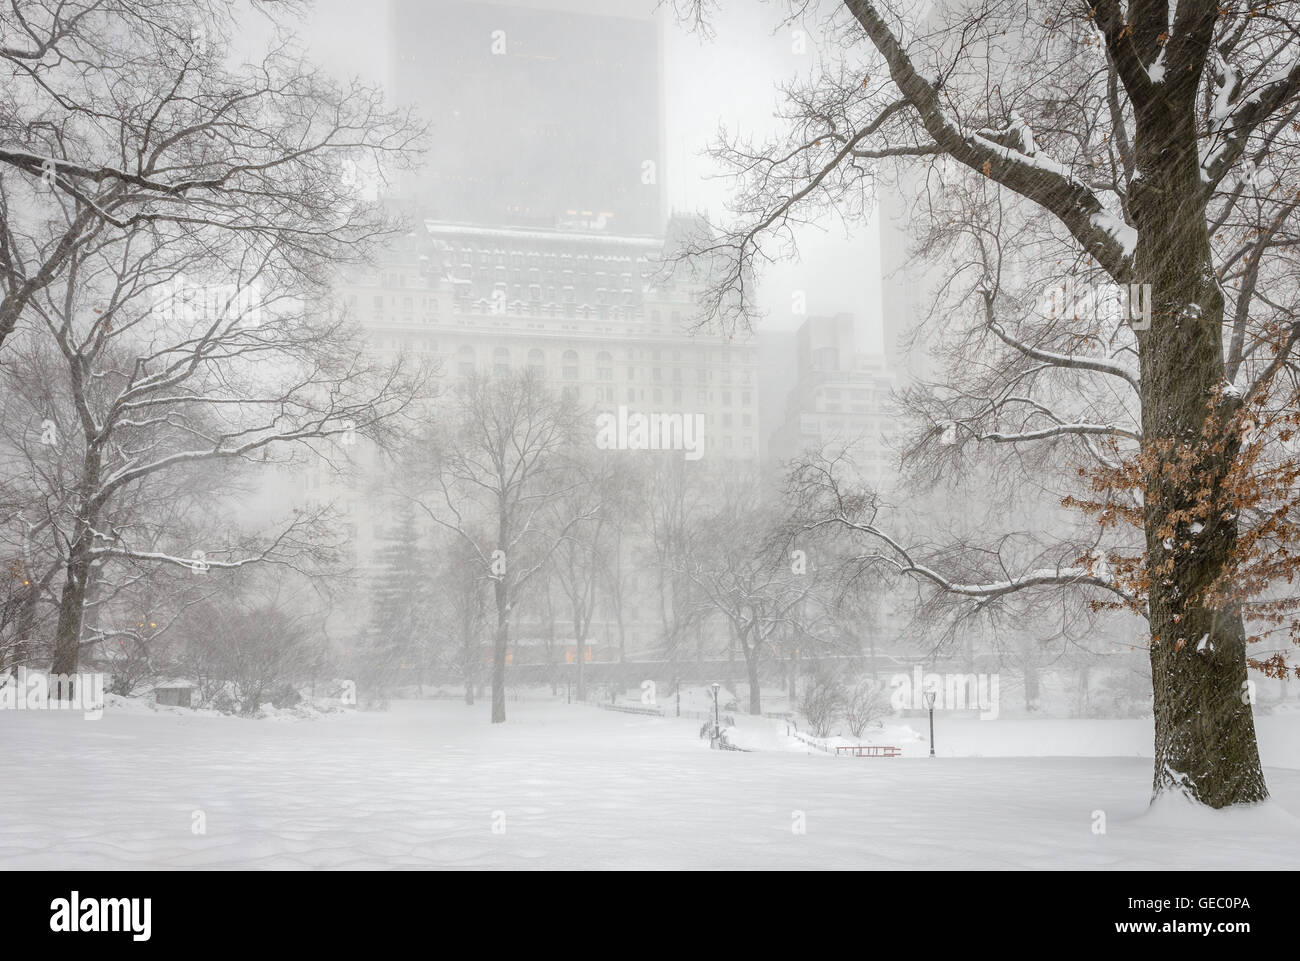 Snowfall in Central Park near the Pond with The Plaza and Midtown Manhattan skyscrapers. New York City Stock Photo